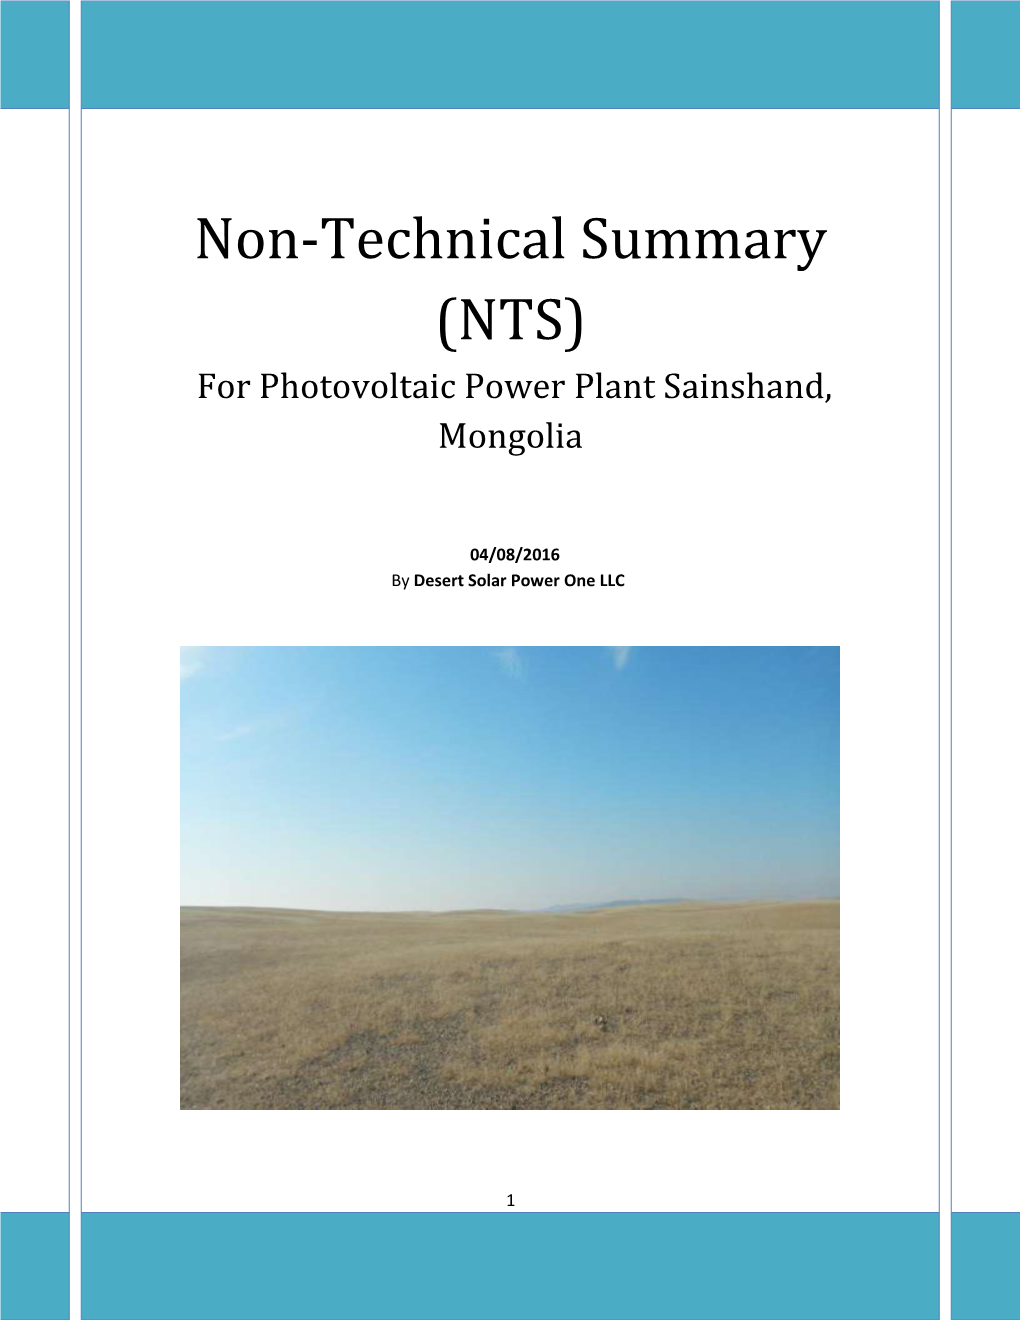 Non-Technical Summary (NTS) for Photovoltaic Power Plant Sainshand, Mongolia